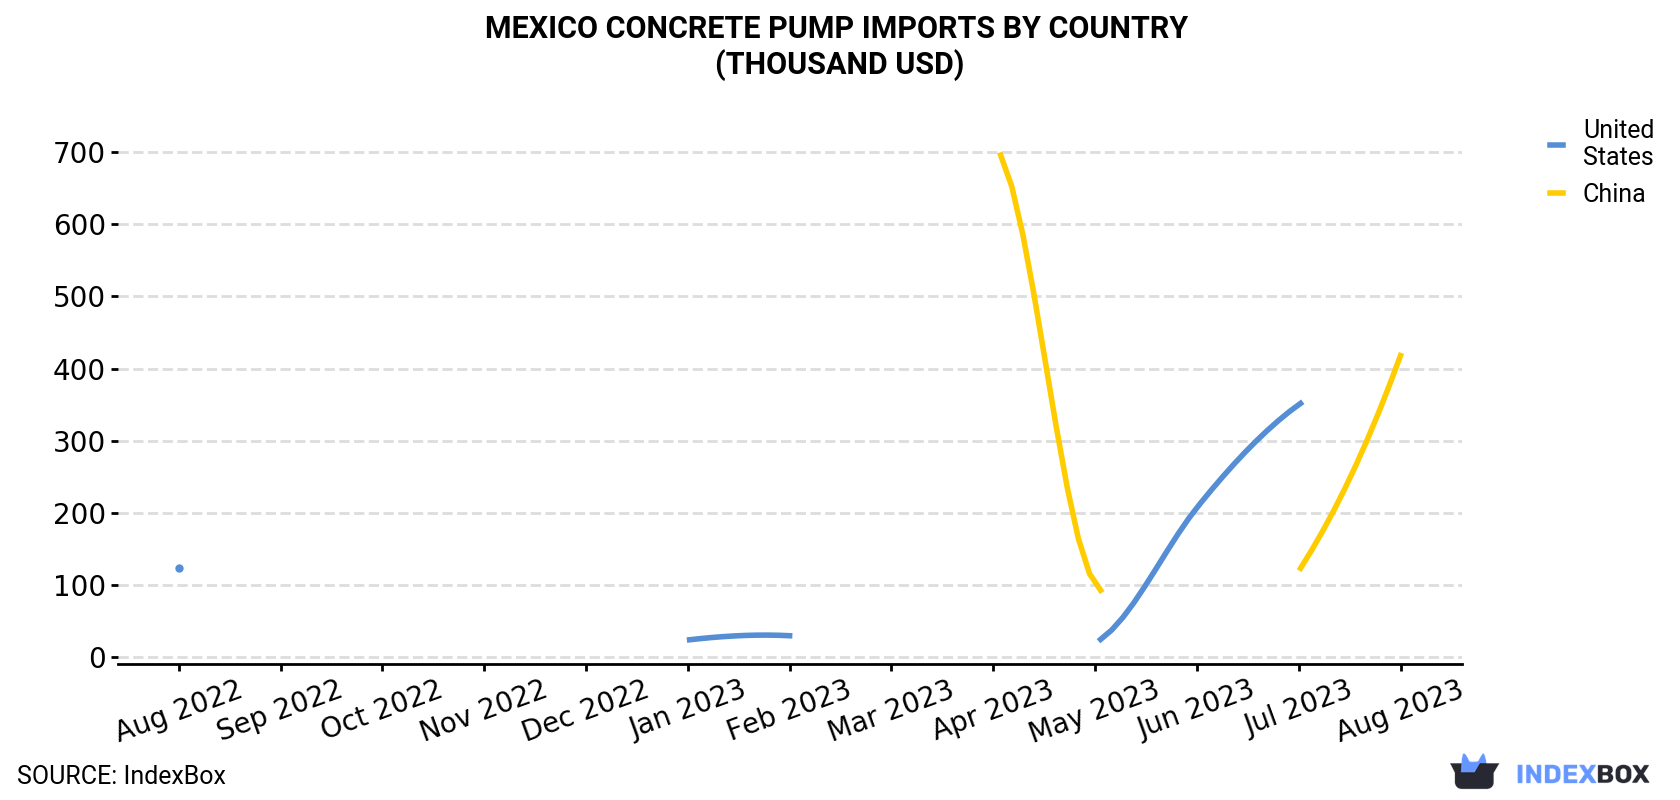 Mexico Concrete Pump Imports By Country (Thousand USD)